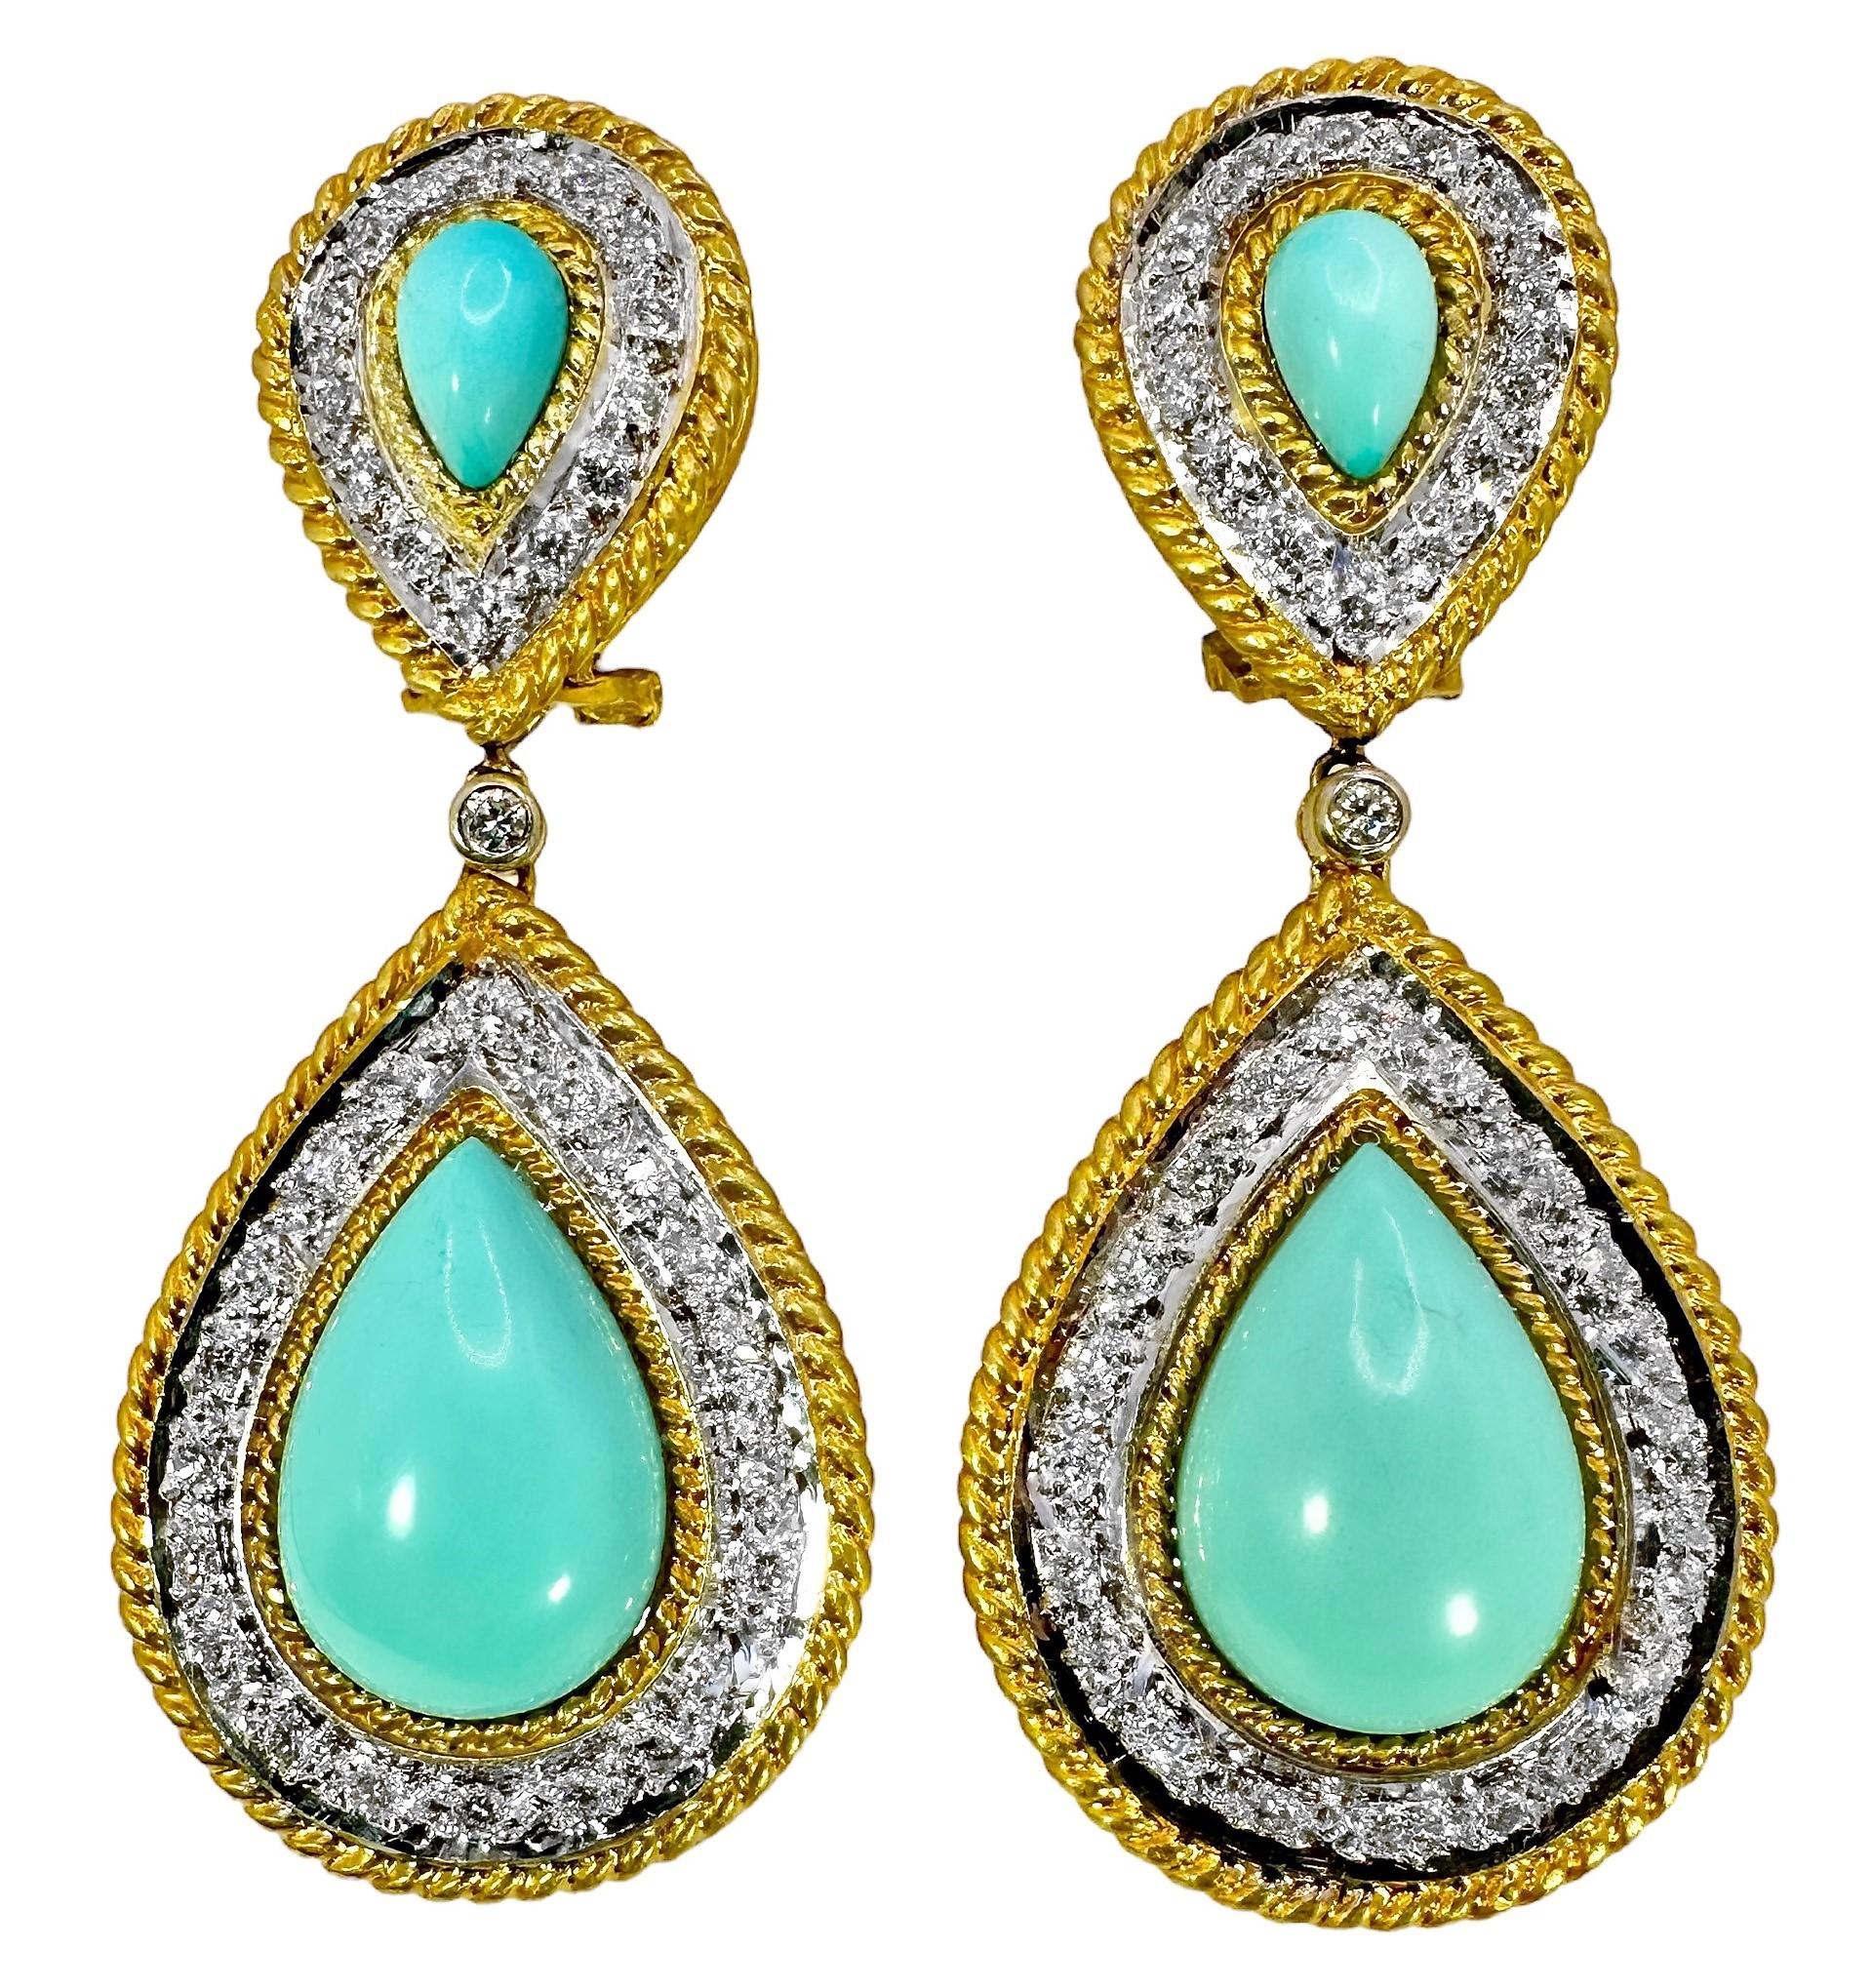 This splendid pair of 18k yellow gold, late 20th century earrings are a symphony in design and highly complimentary colors. Rich 18k gold blends with delicate Persian turquoise and bright white diamonds creating an extremely pleasing and aesthetic